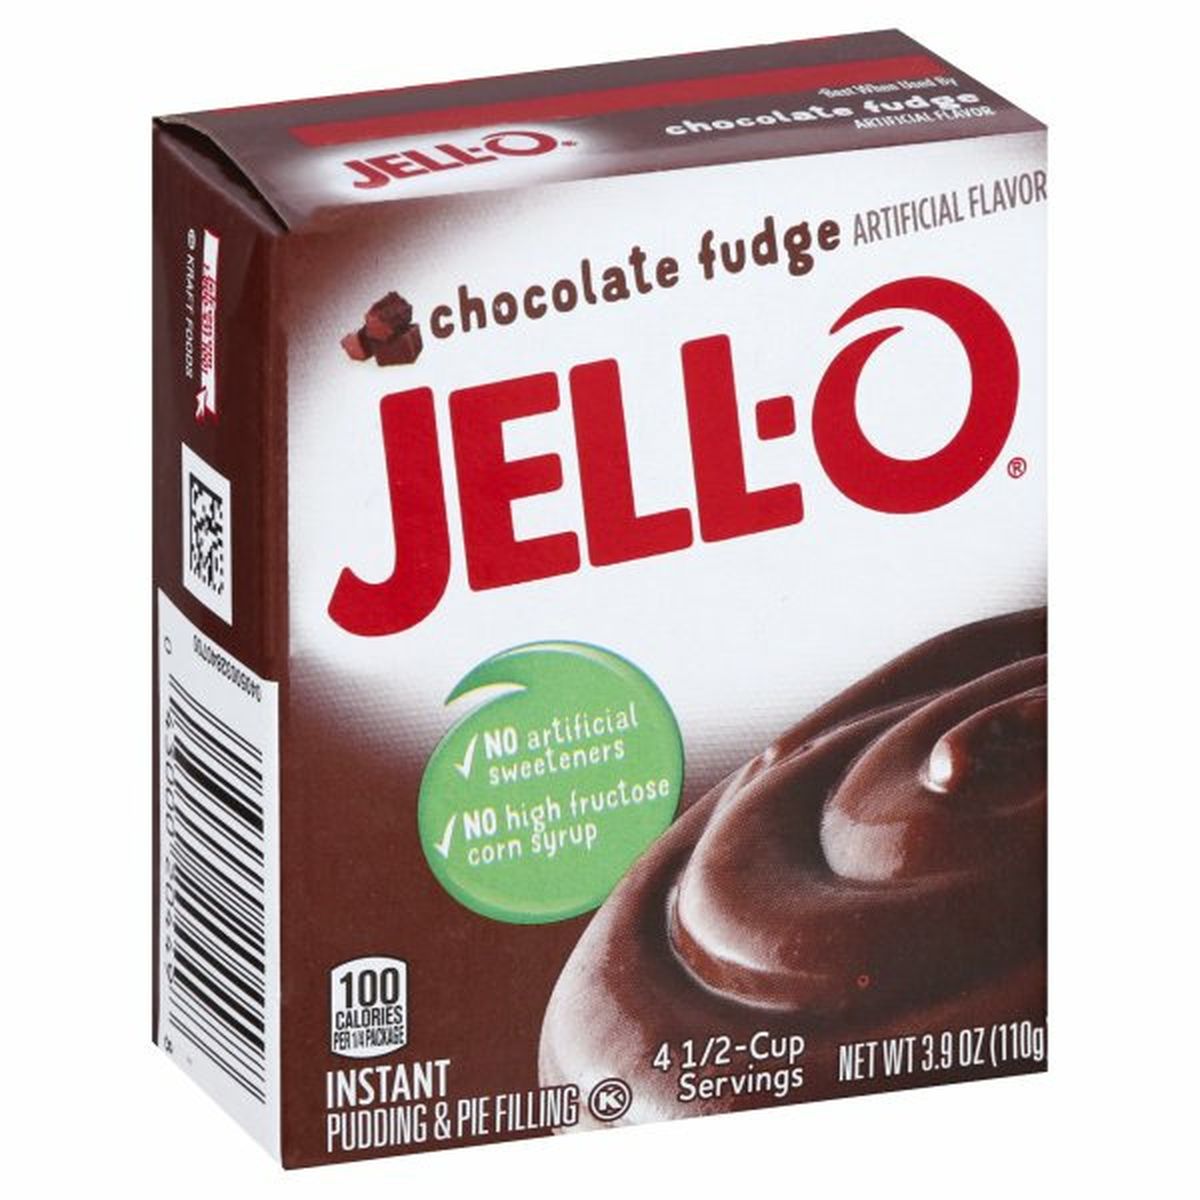 Calories in Jell-O Pudding & Pie Filling, Instant, Chocolate Fudge